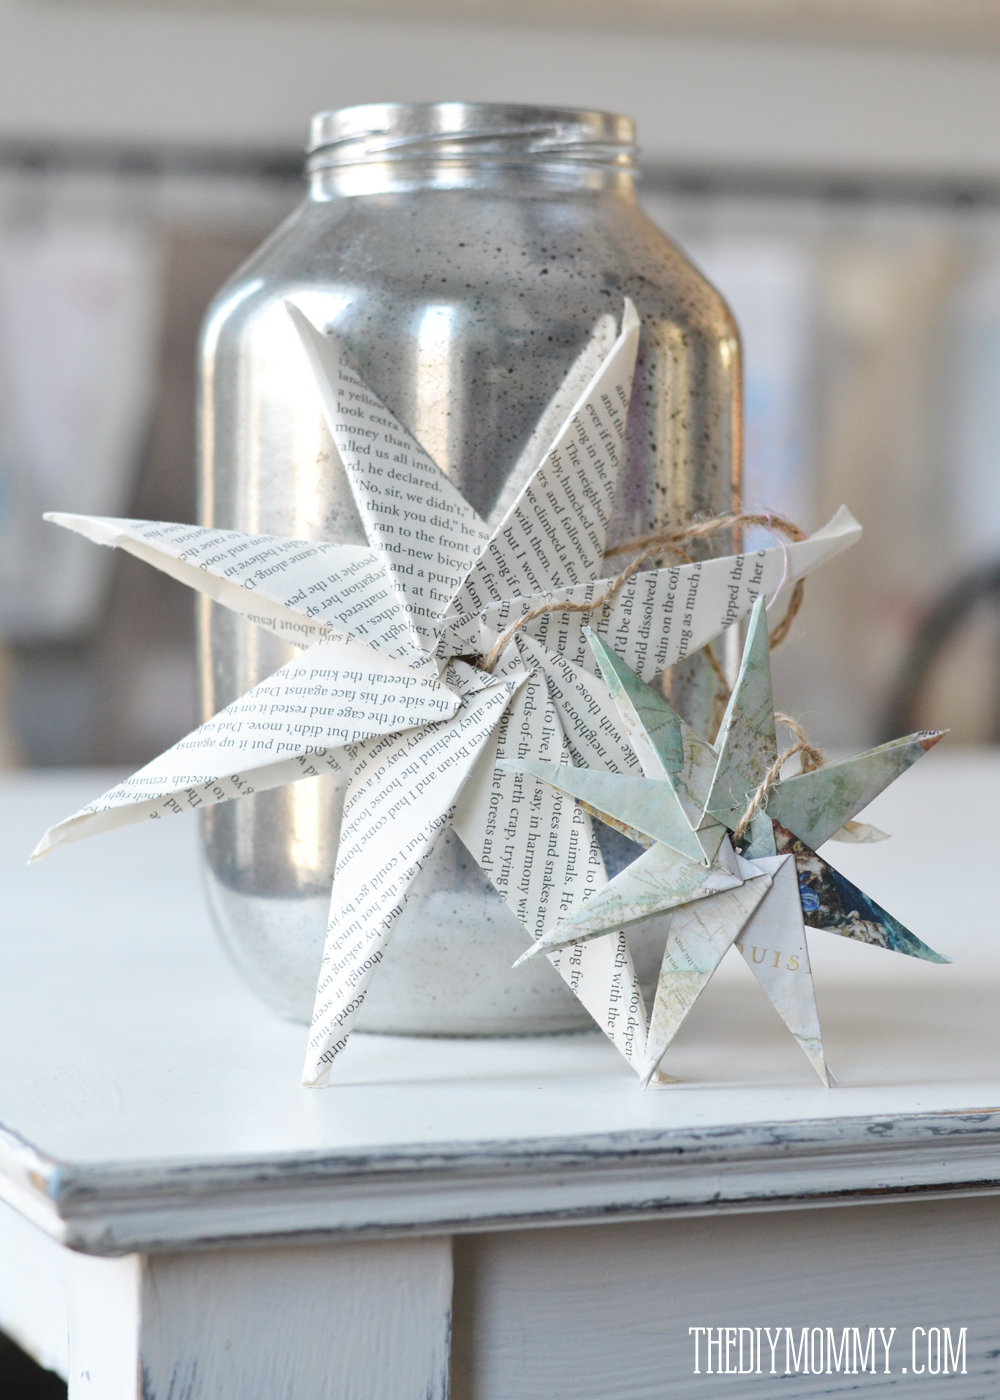 DIY Christmas Ornament: Book Page or Map Paper Star | The DIY Mommy